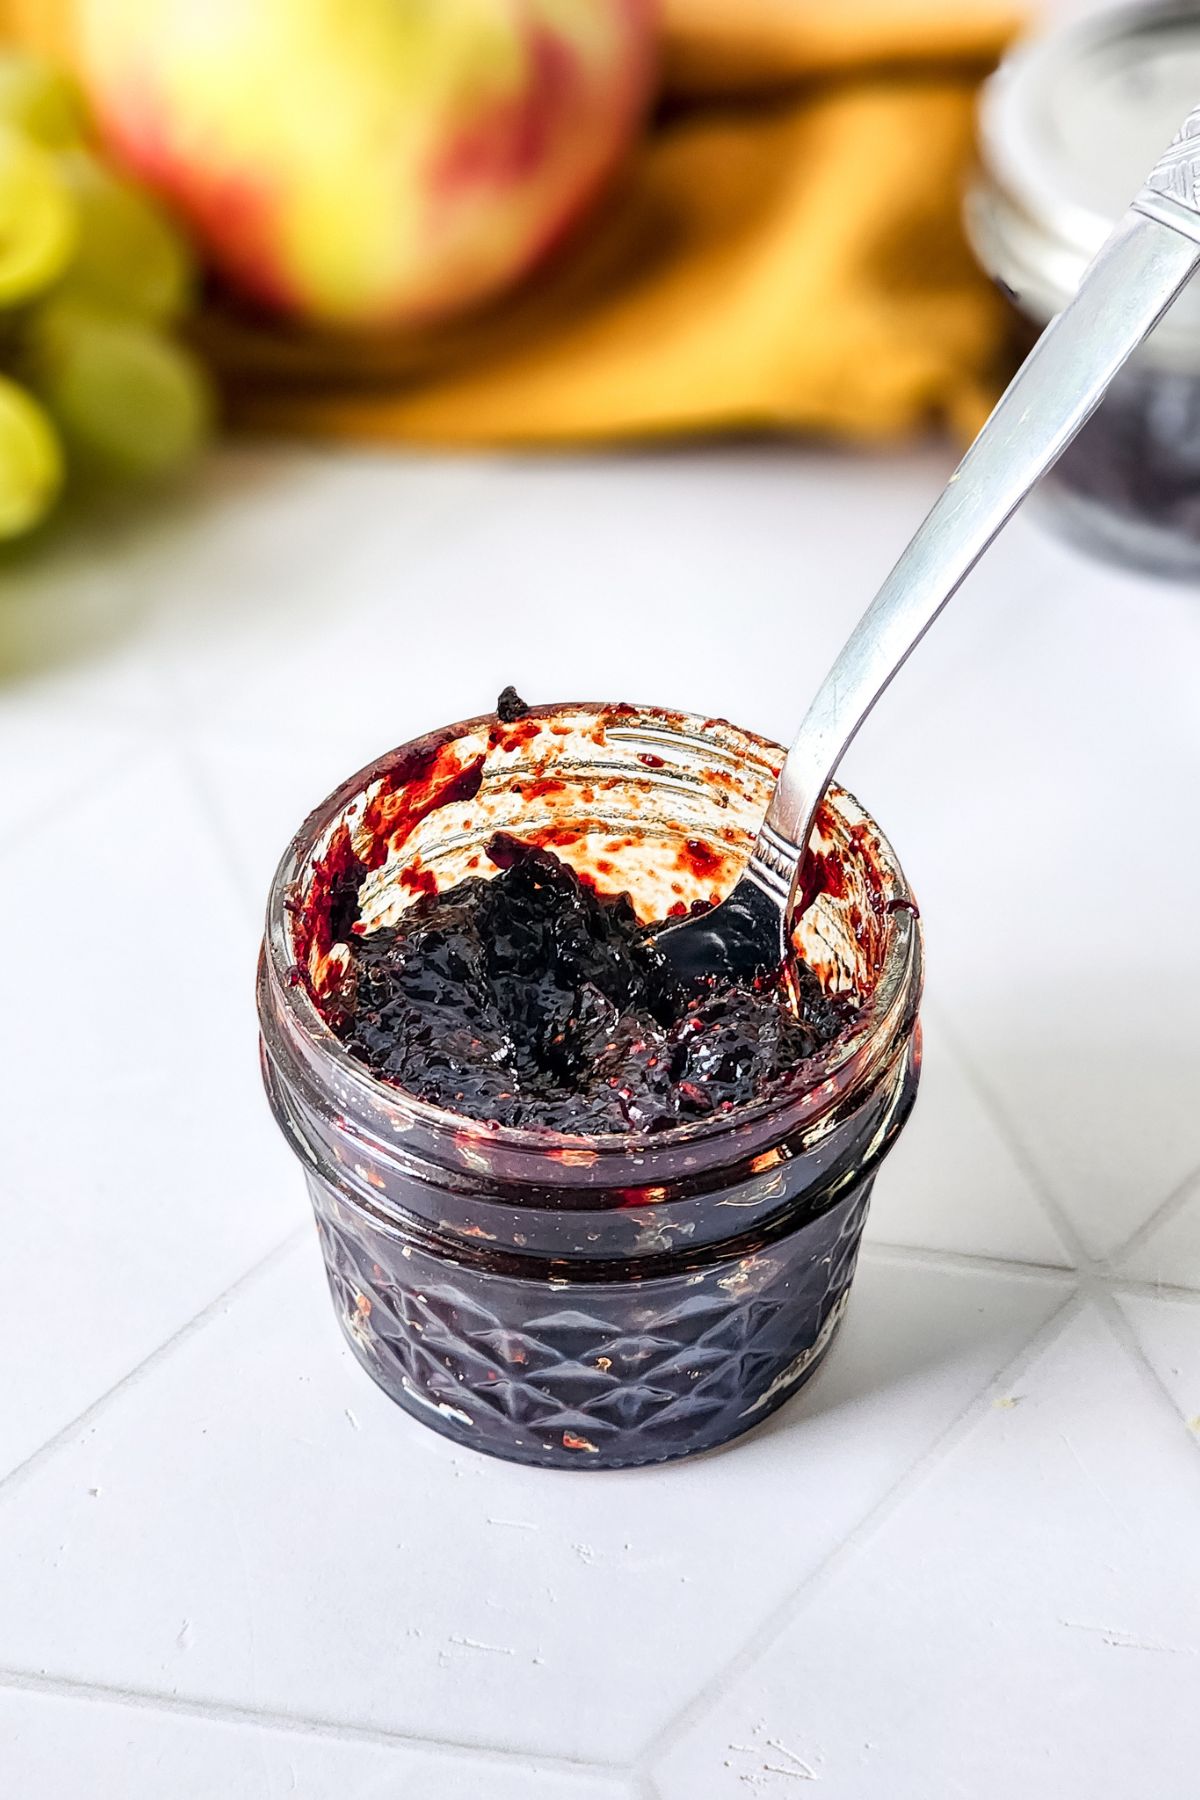 A spoon in a jar of Mixed Berry Jam.